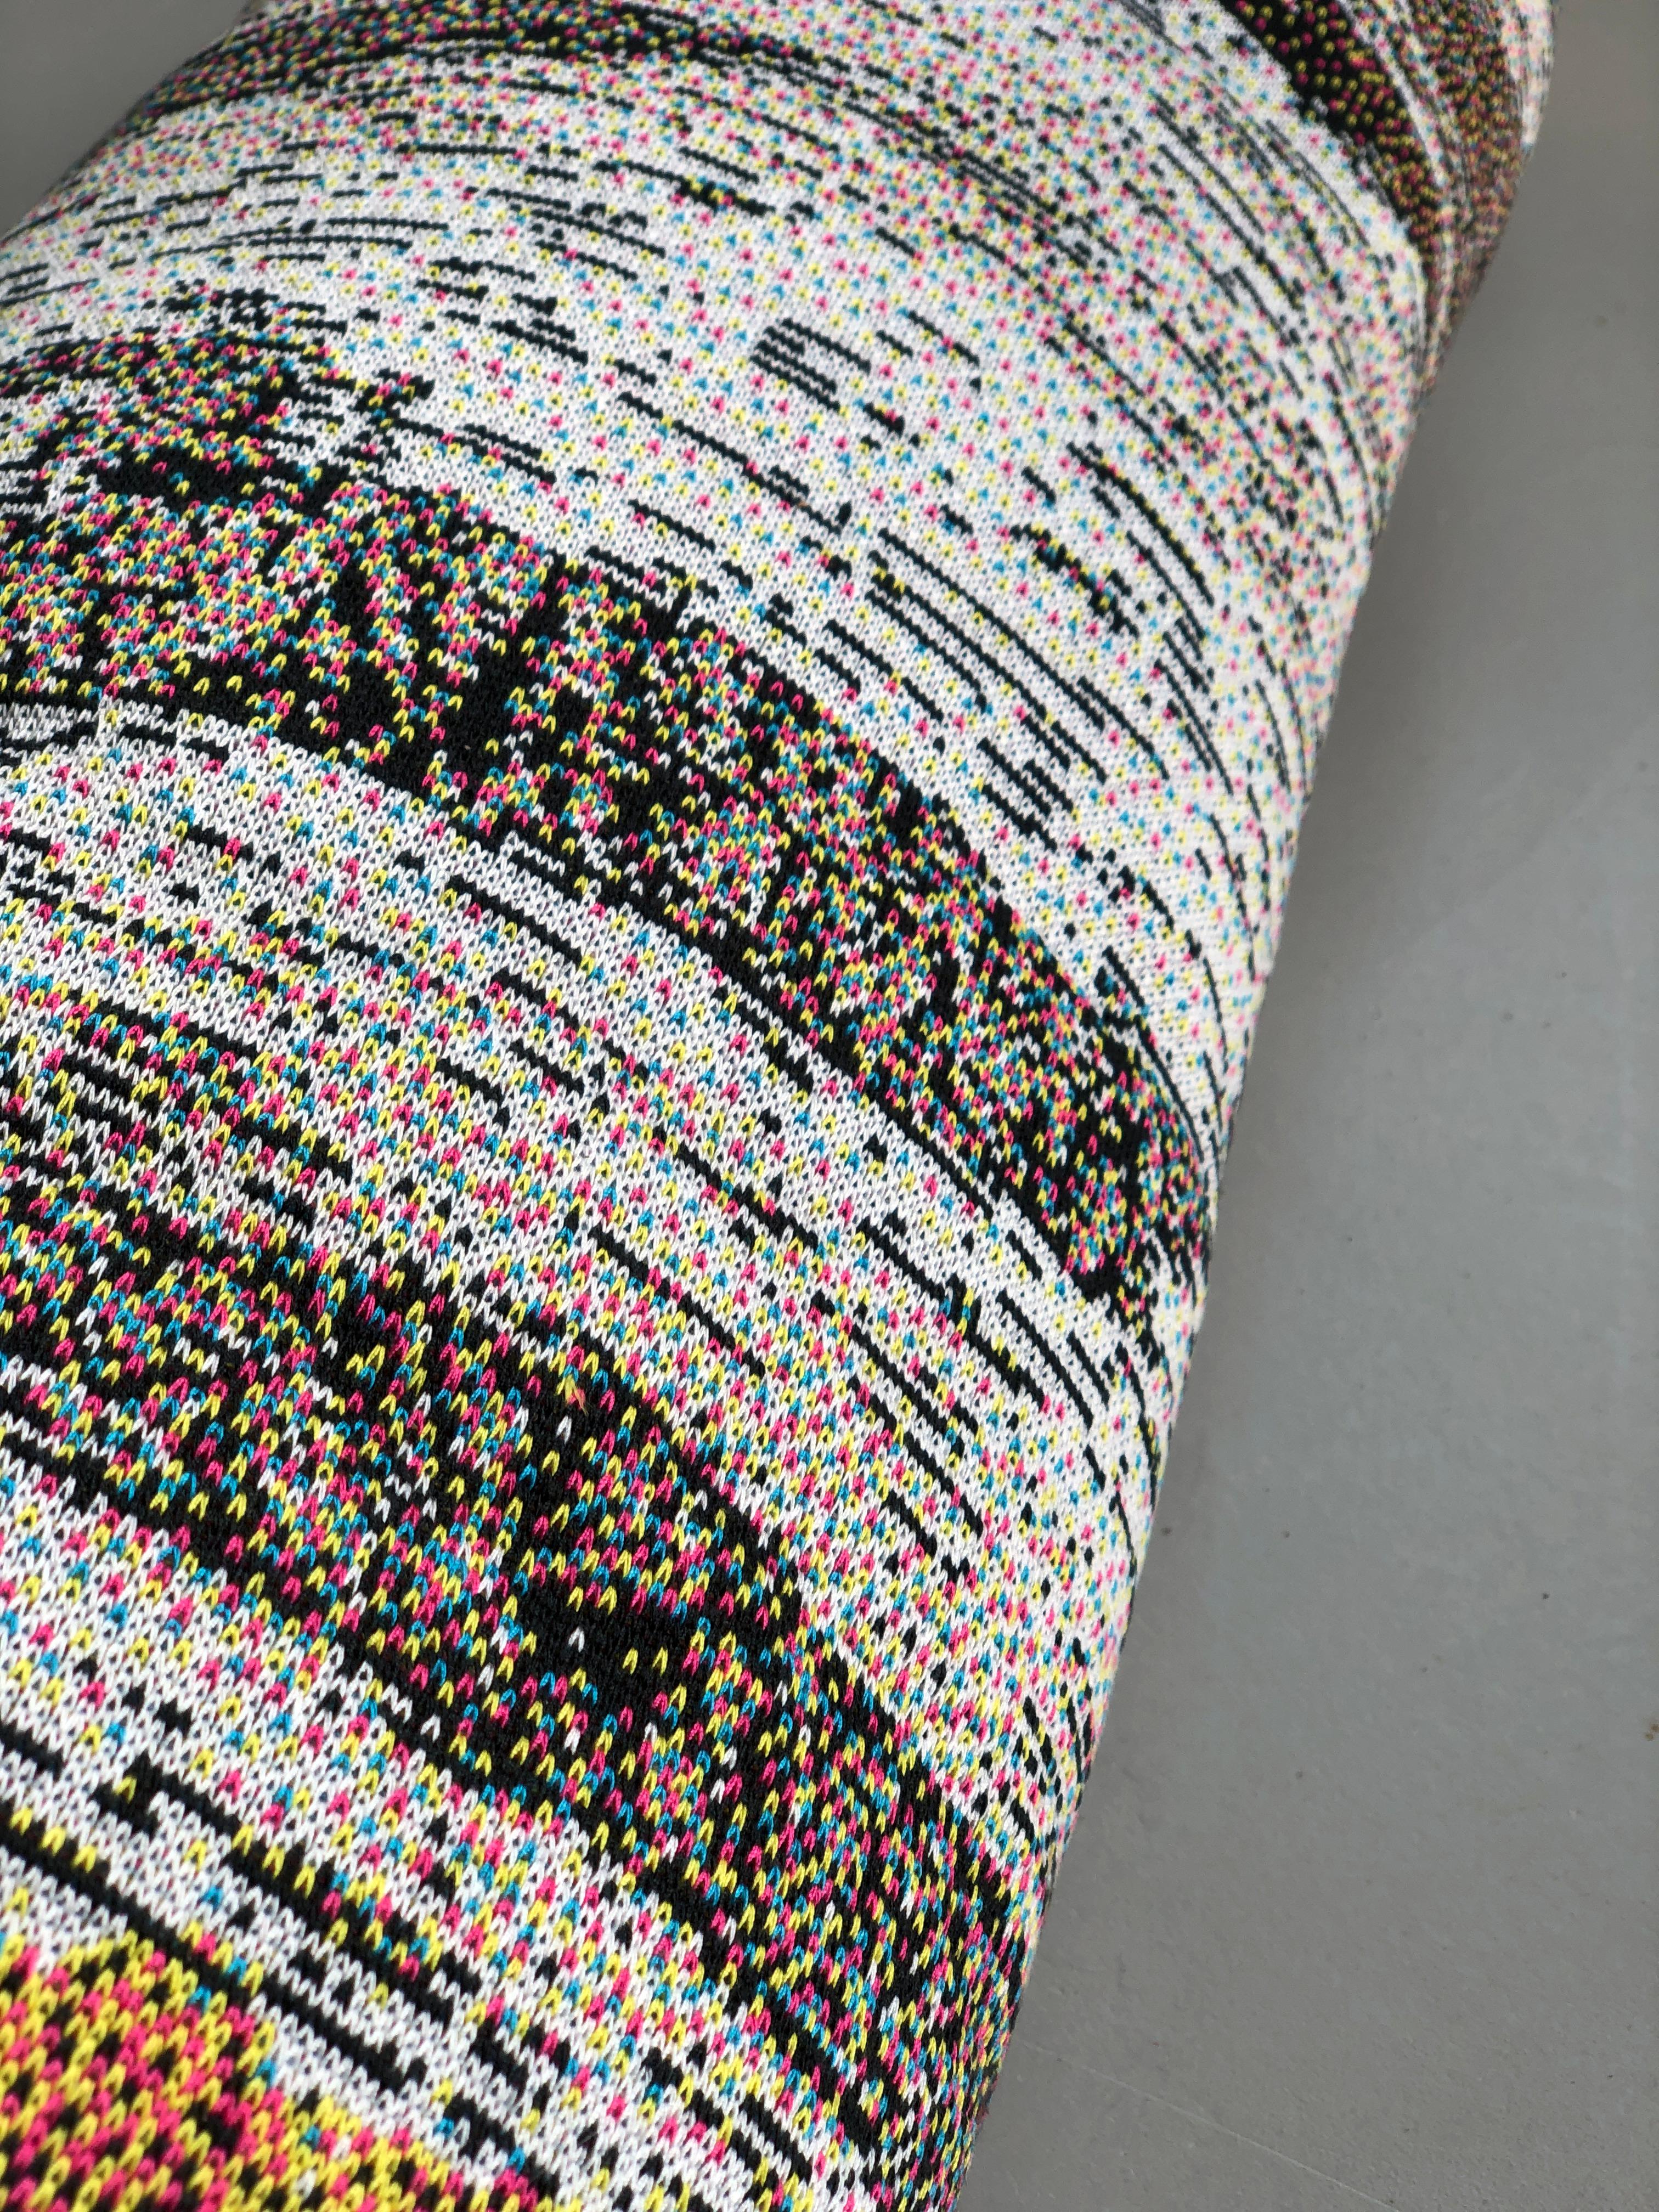 Contemporary White birch tree log bolster knitted pixeled pillow long - Textile - Pillows For Sale